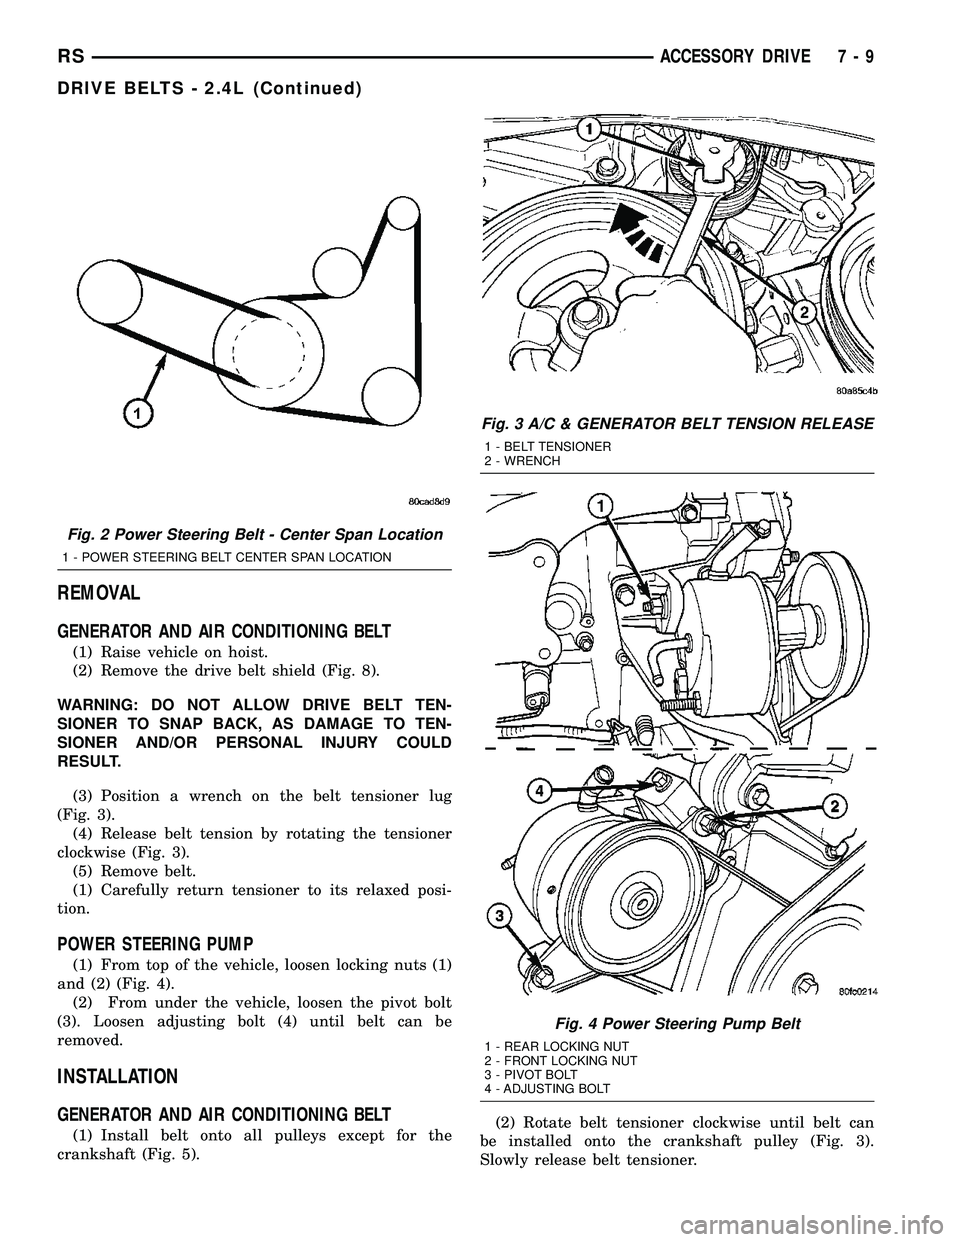 CHRYSLER VOYAGER 2005  Service Manual REMOVAL
GENERATOR AND AIR CONDITIONING BELT
(1) Raise vehicle on hoist.
(2) Remove the drive belt shield (Fig. 8).
WARNING: DO NOT ALLOW DRIVE BELT TEN-
SIONER TO SNAP BACK, AS DAMAGE TO TEN-
SIONER A